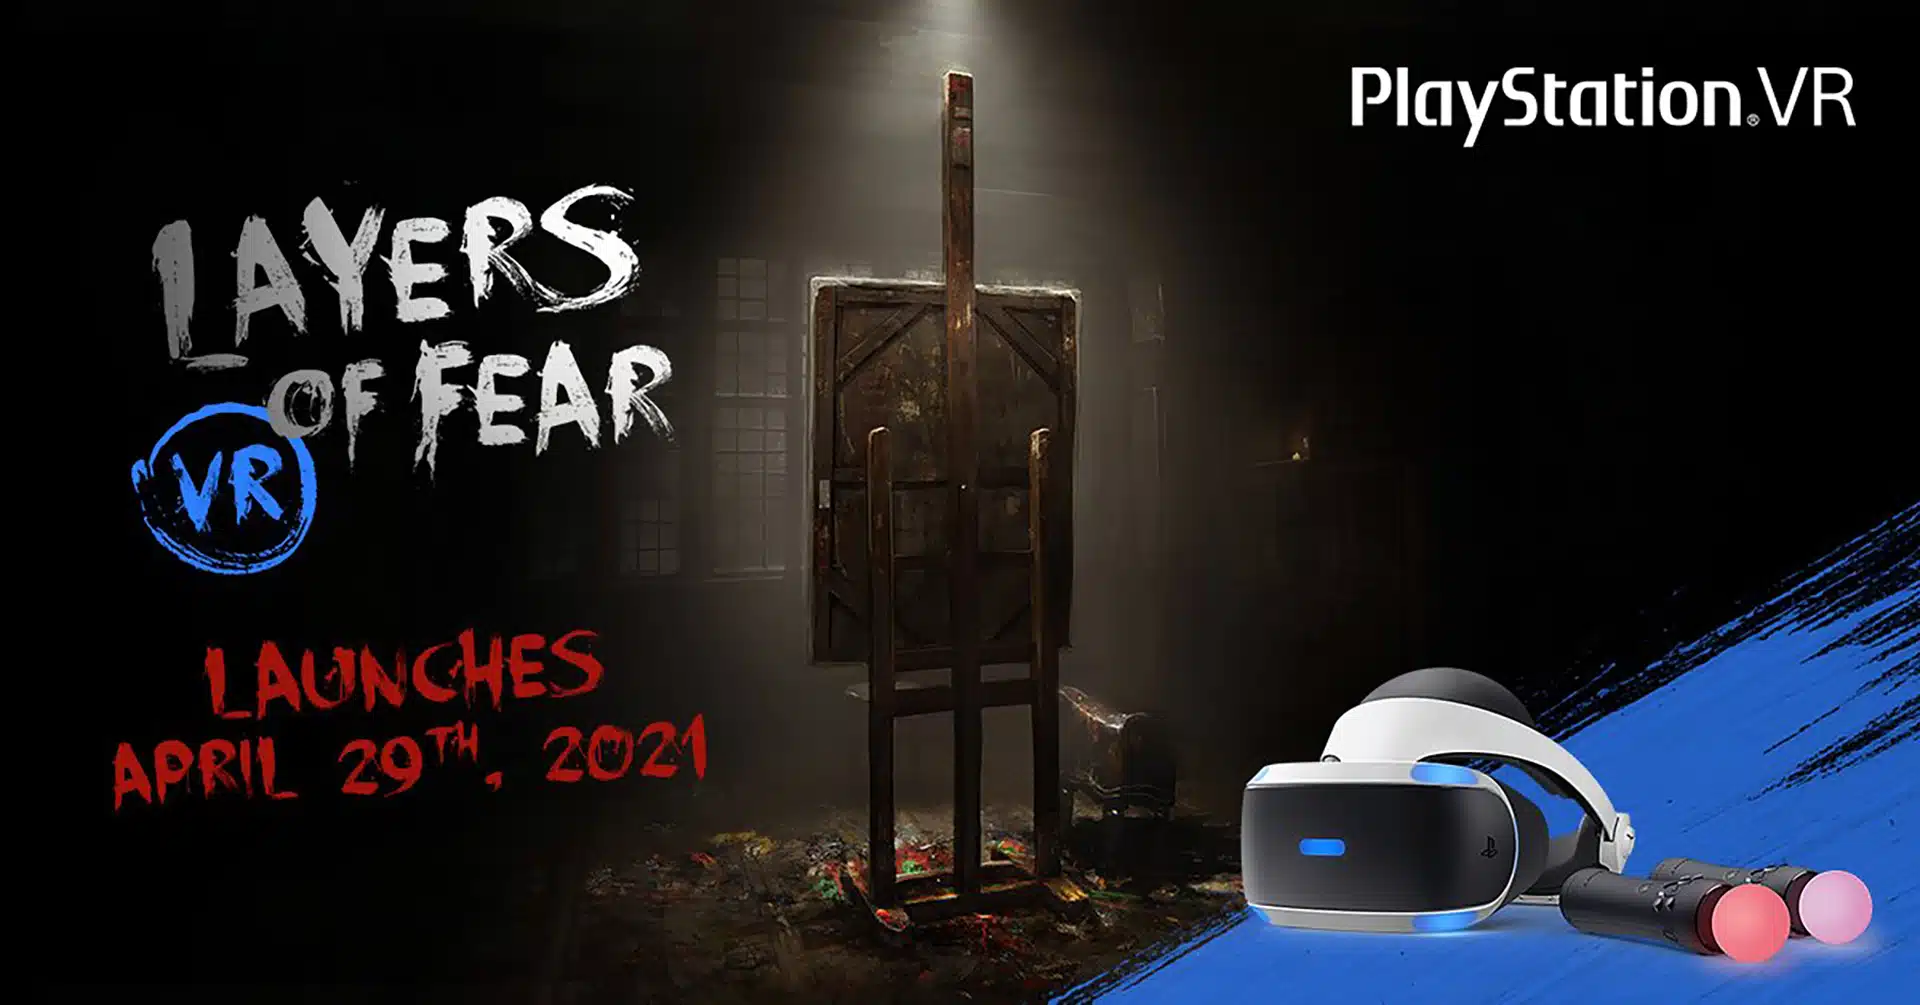 Layers Of Fear PSVR - An Honest Review